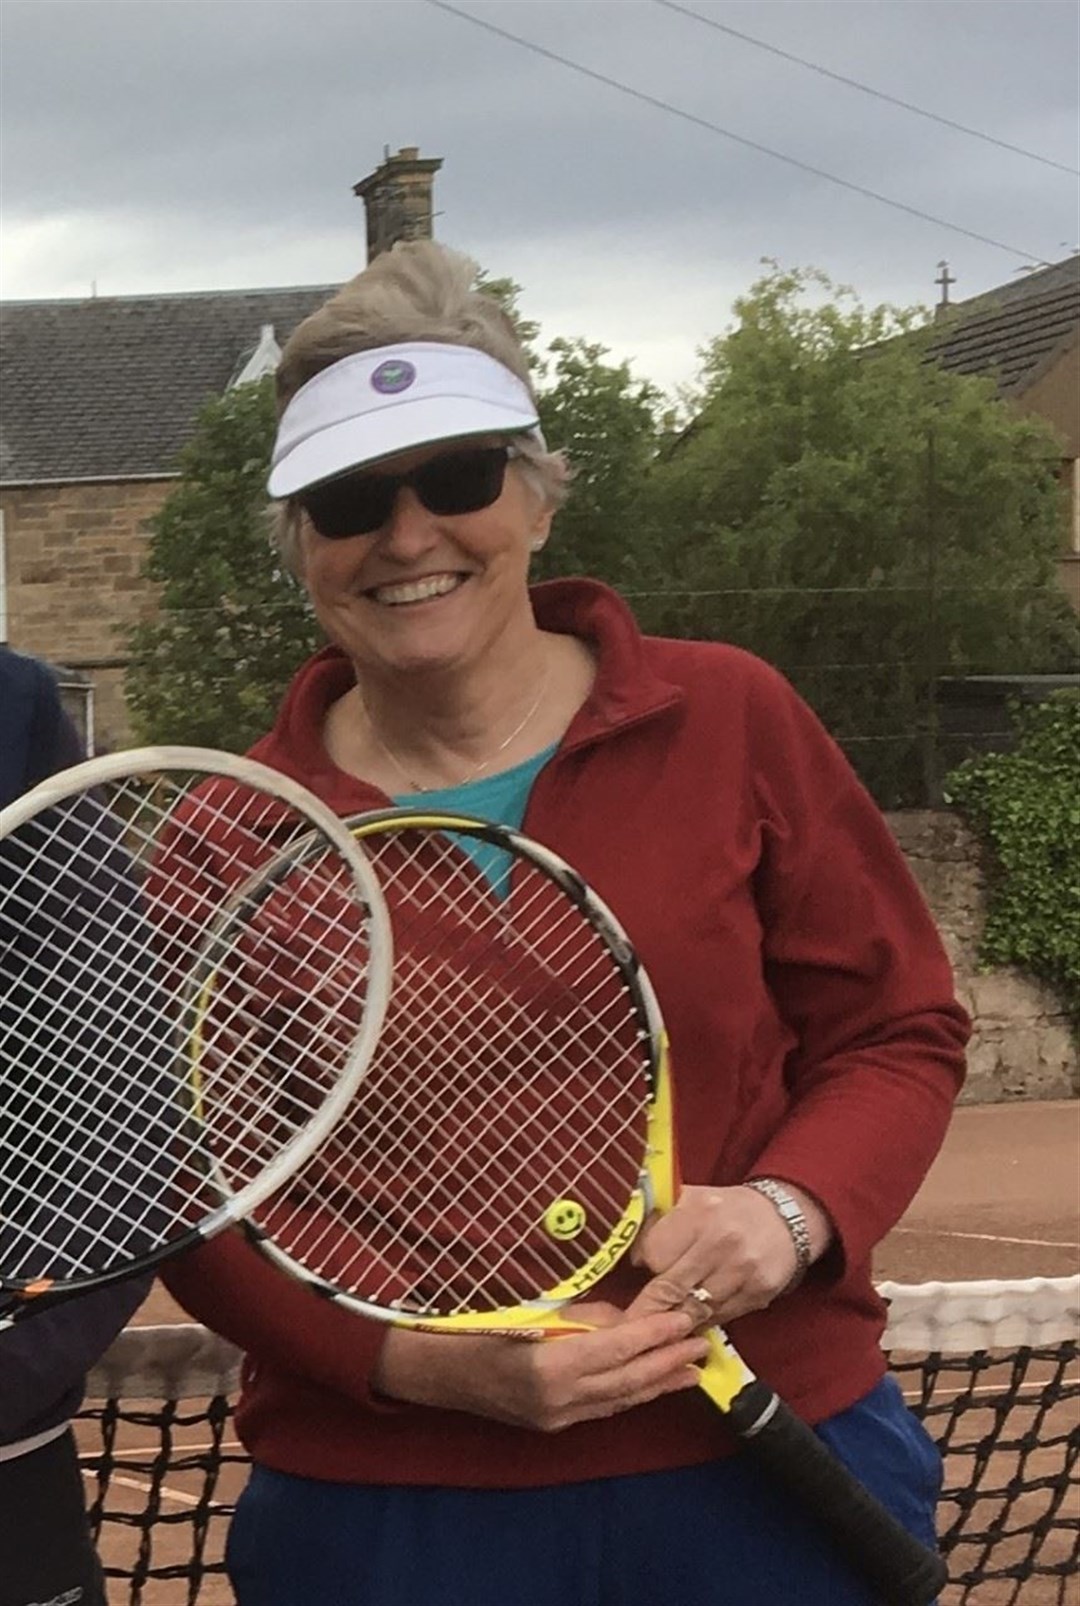 Teresa Tait, who plays with Elgin and Rothes tennis clubs.